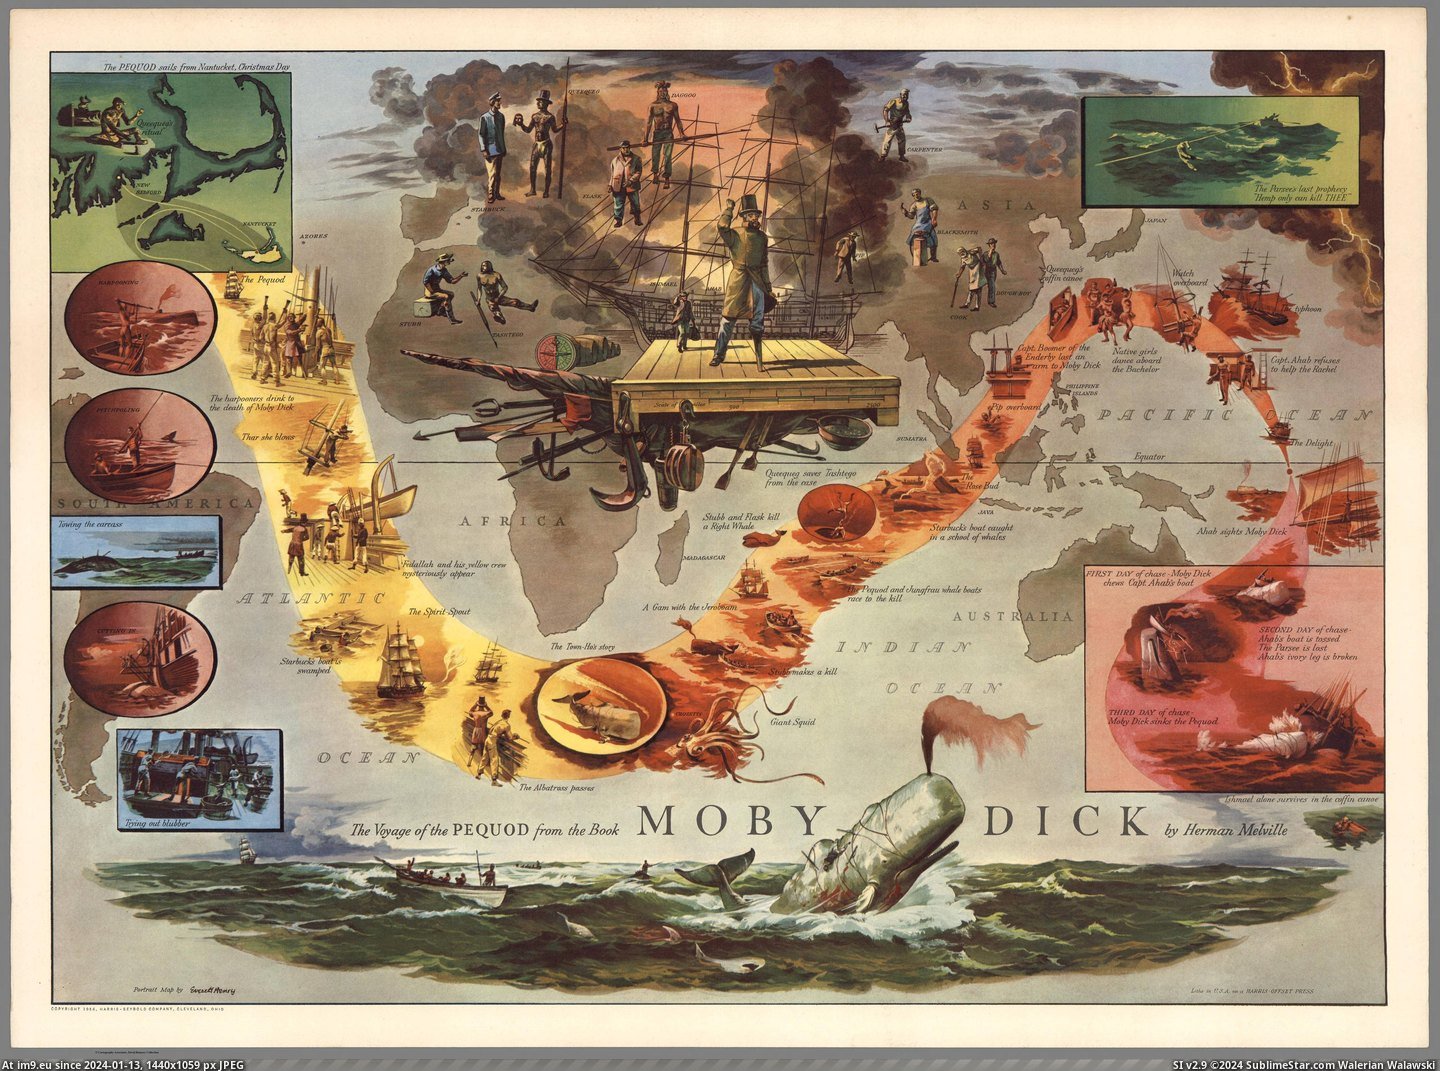 #Map #Dick #Book #Created #Everett #Melville #Pequod #Henry #Moby #Herman #Voyage [Mapporn] The Voyage of the Pequod from the Book Moby Dick by Herman Melville. Map created by Everett Henry in 1956 [5118x3776] Pic. (Изображение из альбом My r/MAPS favs))